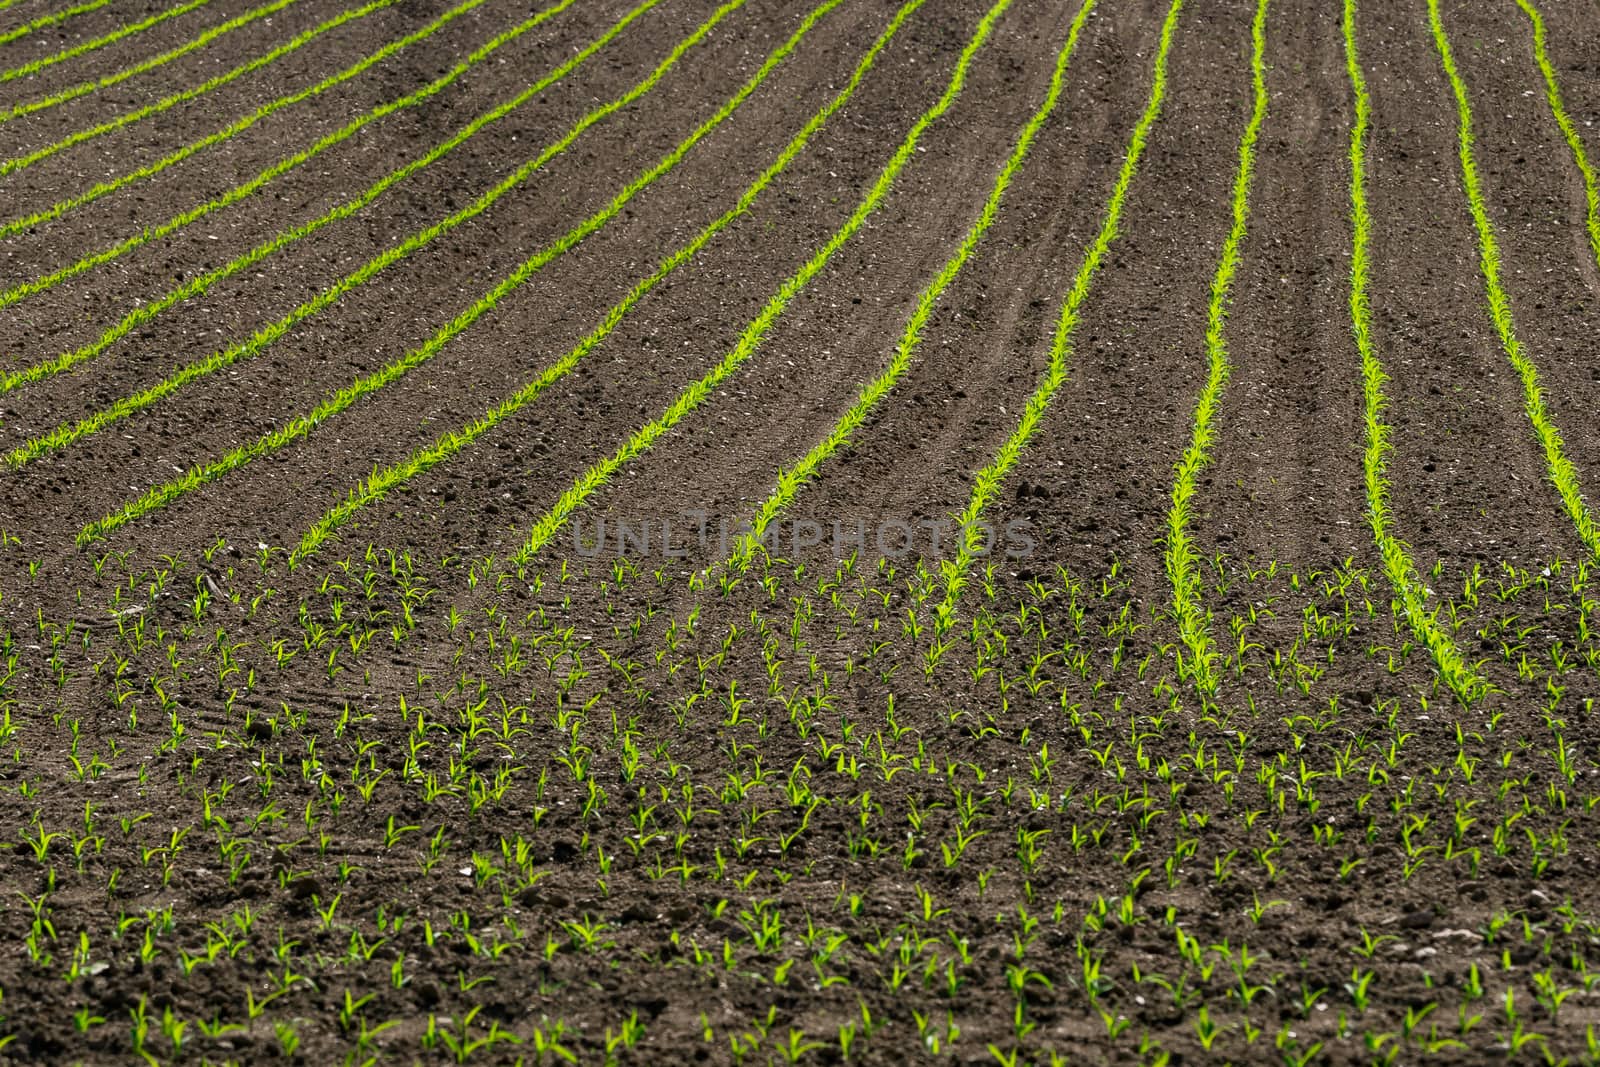 Rows of corn sprouts beginning to grow.
Corn seedlings growing in field in early spring.